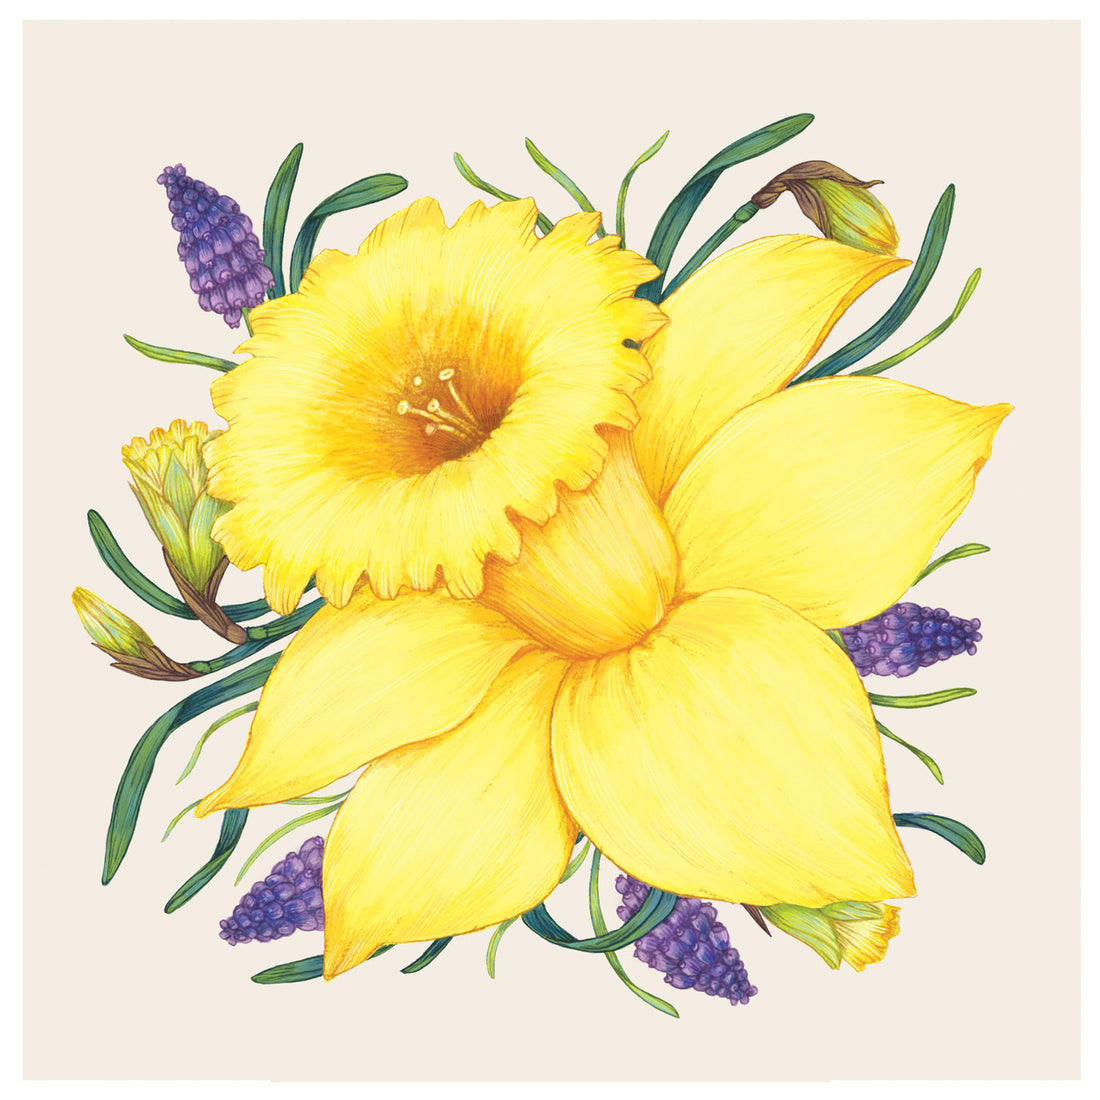 A square, cream cocktail napkin featuring a vibrant, illustrated yellow daffodil blossom surrounded by purple flowers and green leaves.